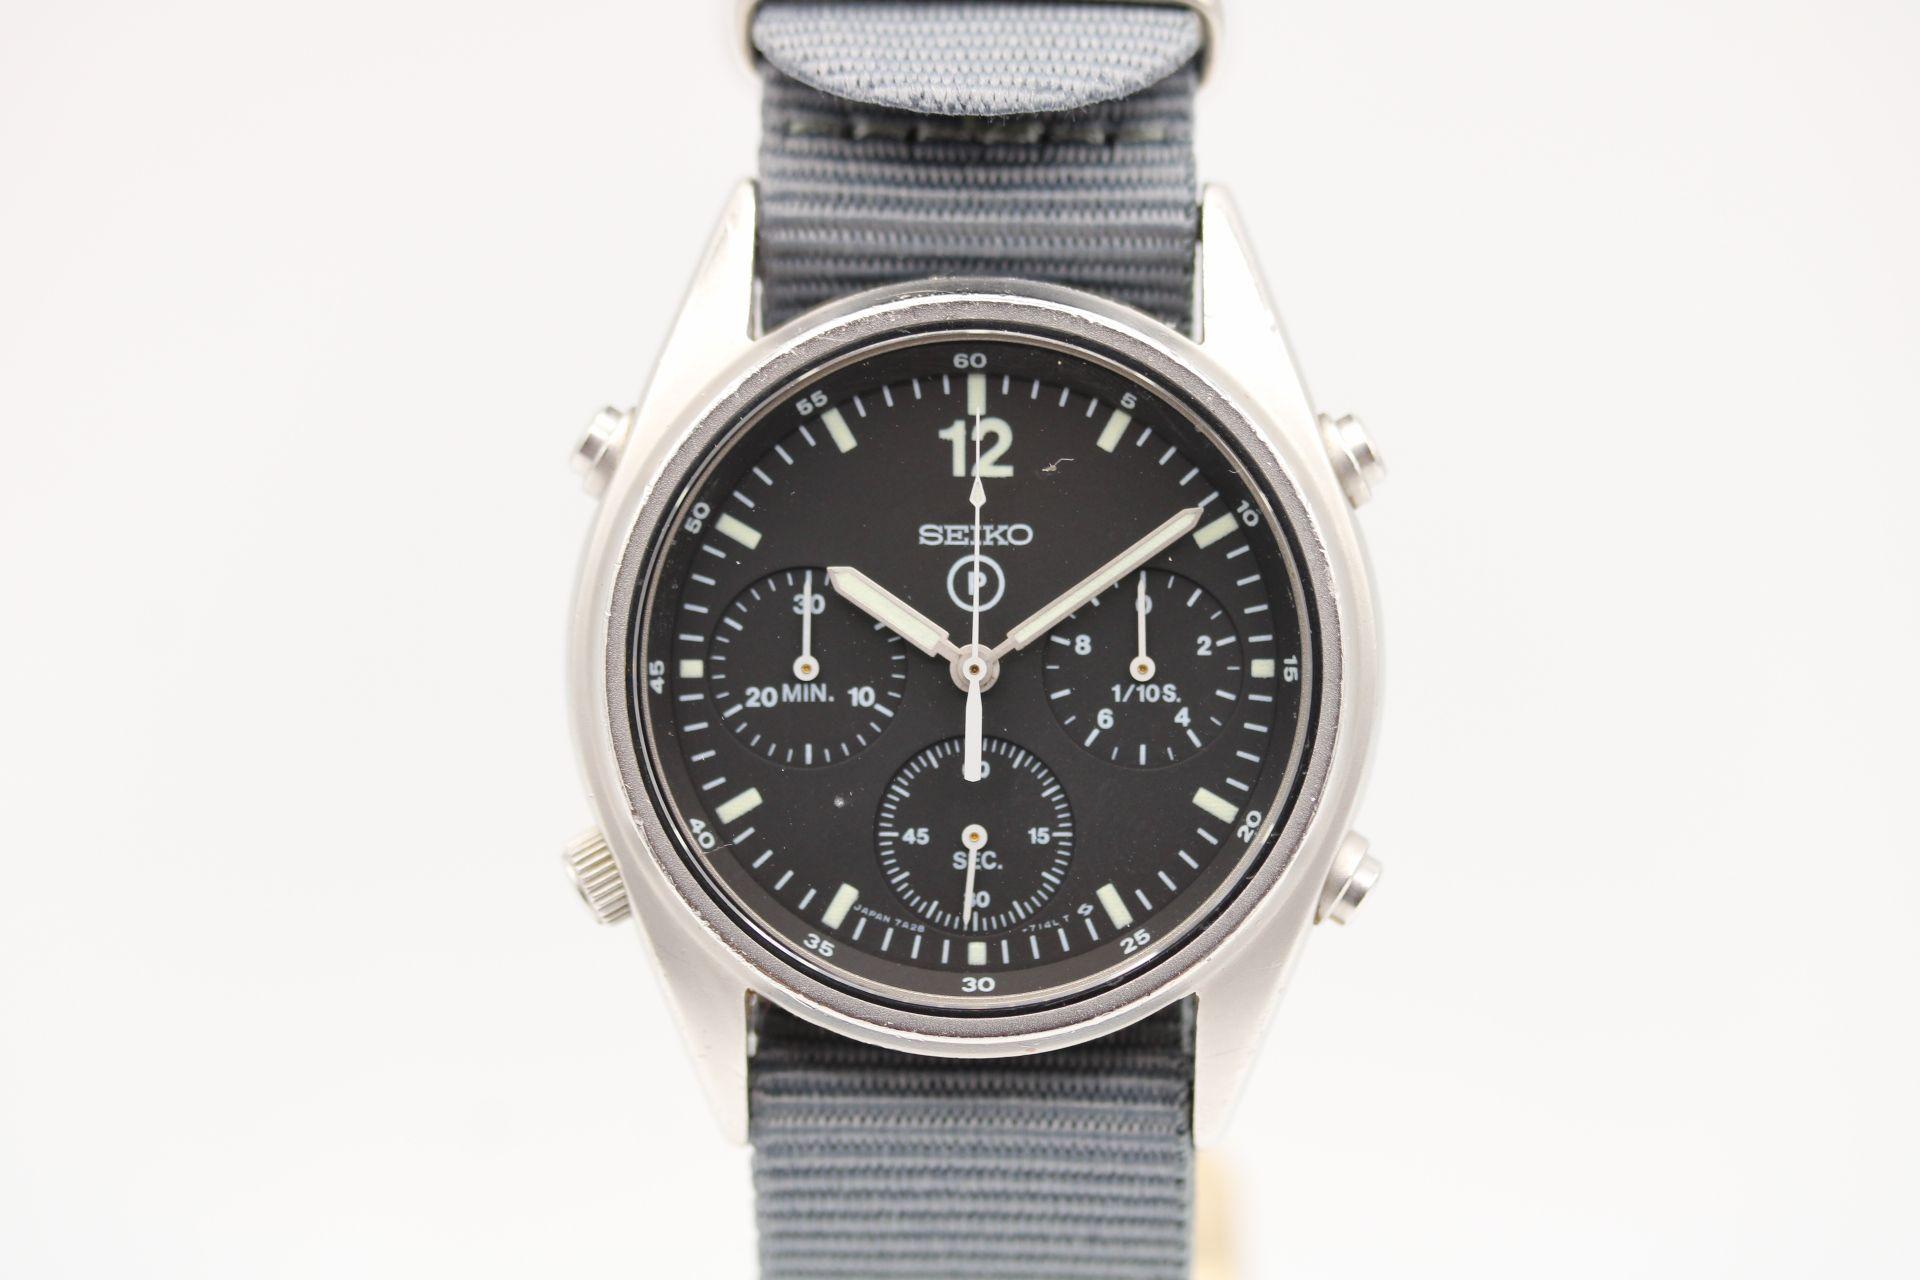 Watch: Seiko Generation 1 7A28-7120
Stock Number: CHW5331
Price: £995.00

Original, working Generation 1 Seiko Chronograph made for the British RAF in 1990. Having been used in service as a tool watch will show some signs of age and minor blemishes